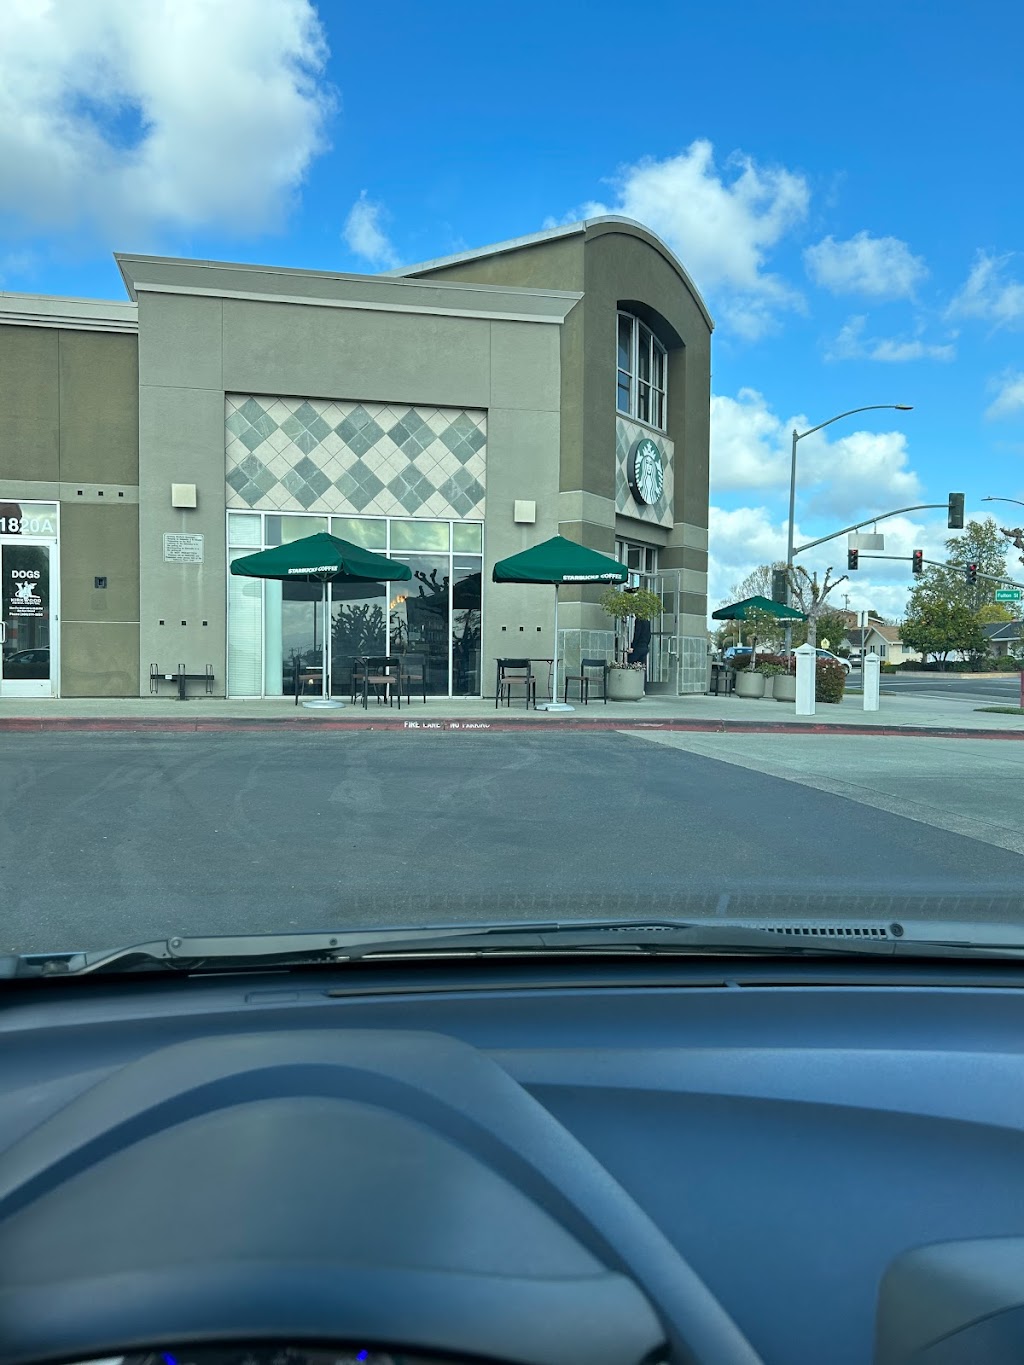 Starbucks | 1820 W Campbell Ave, Campbell, CA 95008 | Phone: (408) 379-2930